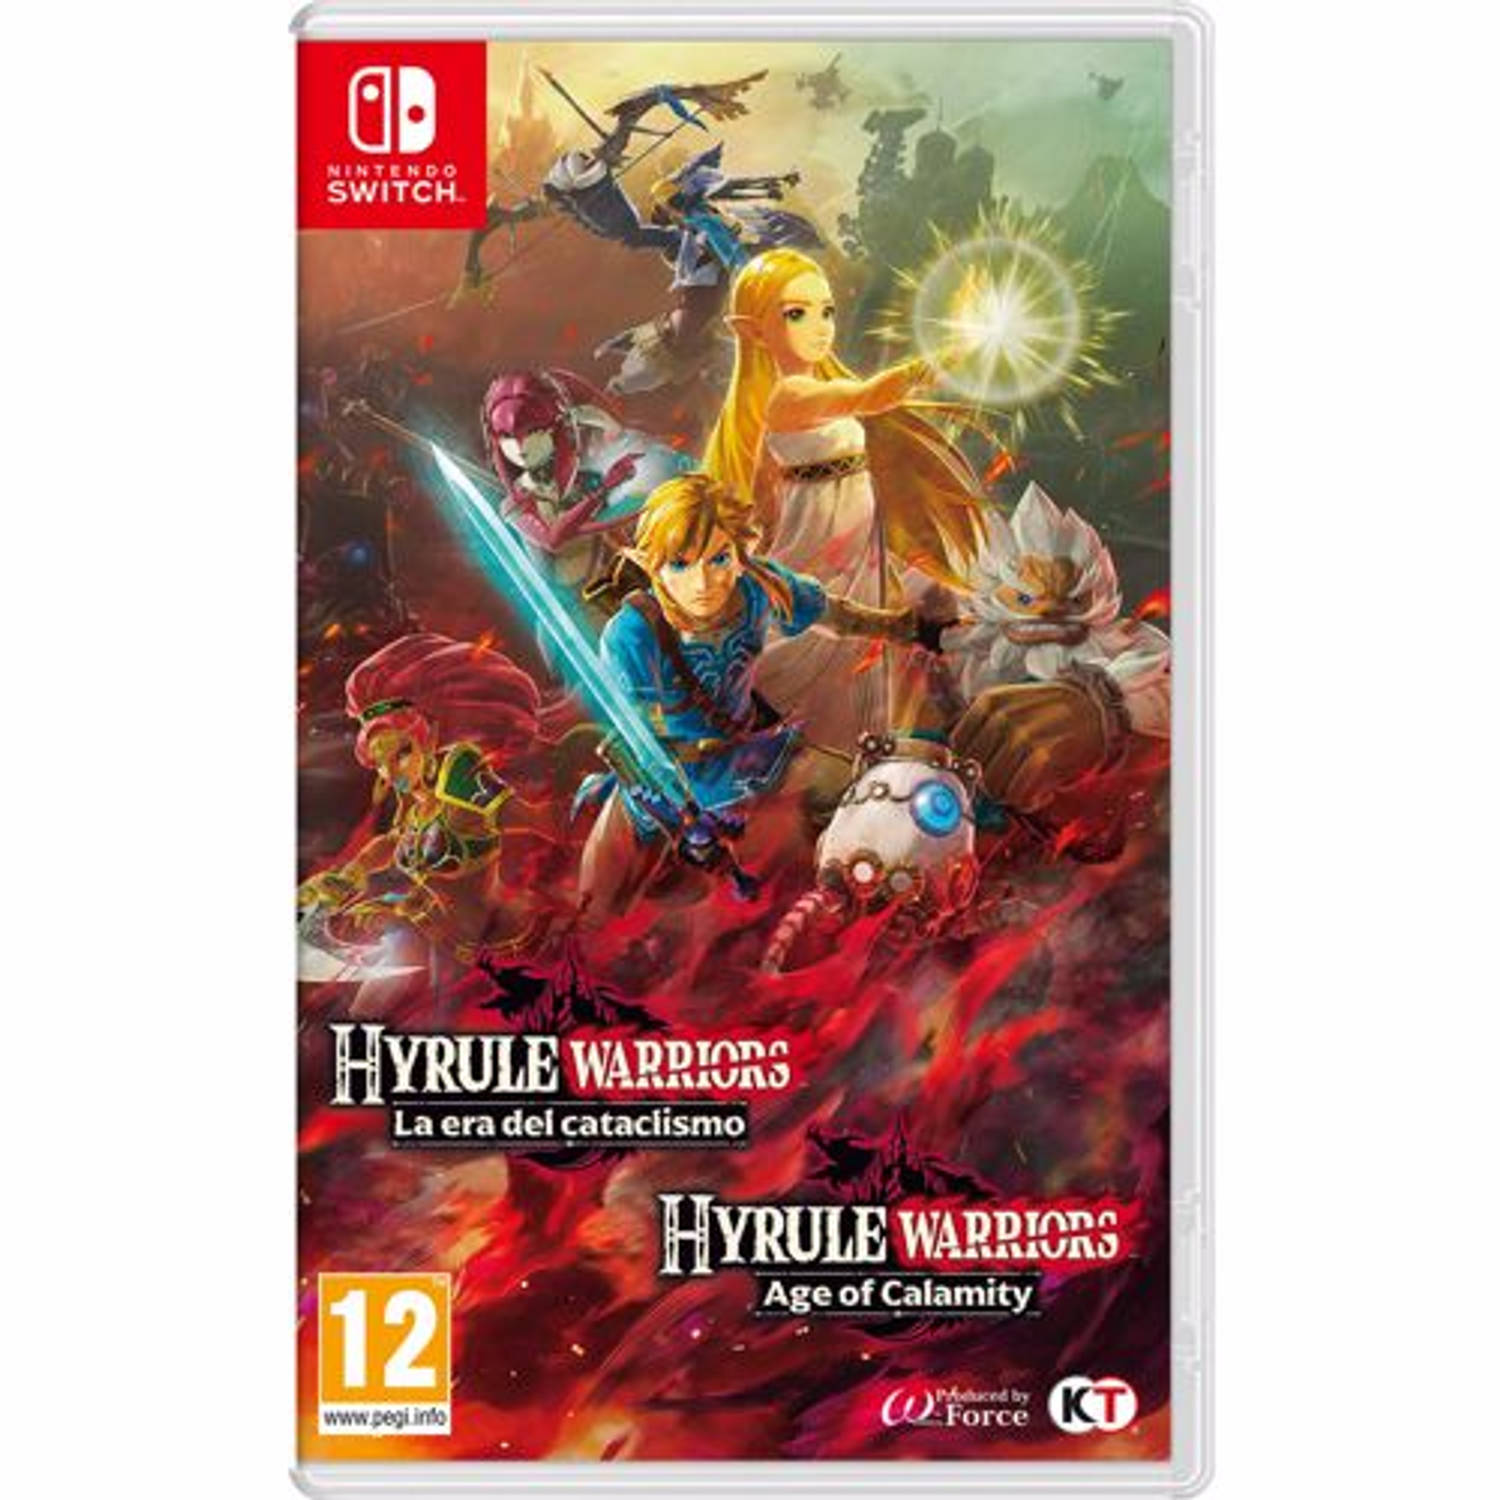 Hyrule warriors Age of calamity, (Nintendo Switch). SWITCH